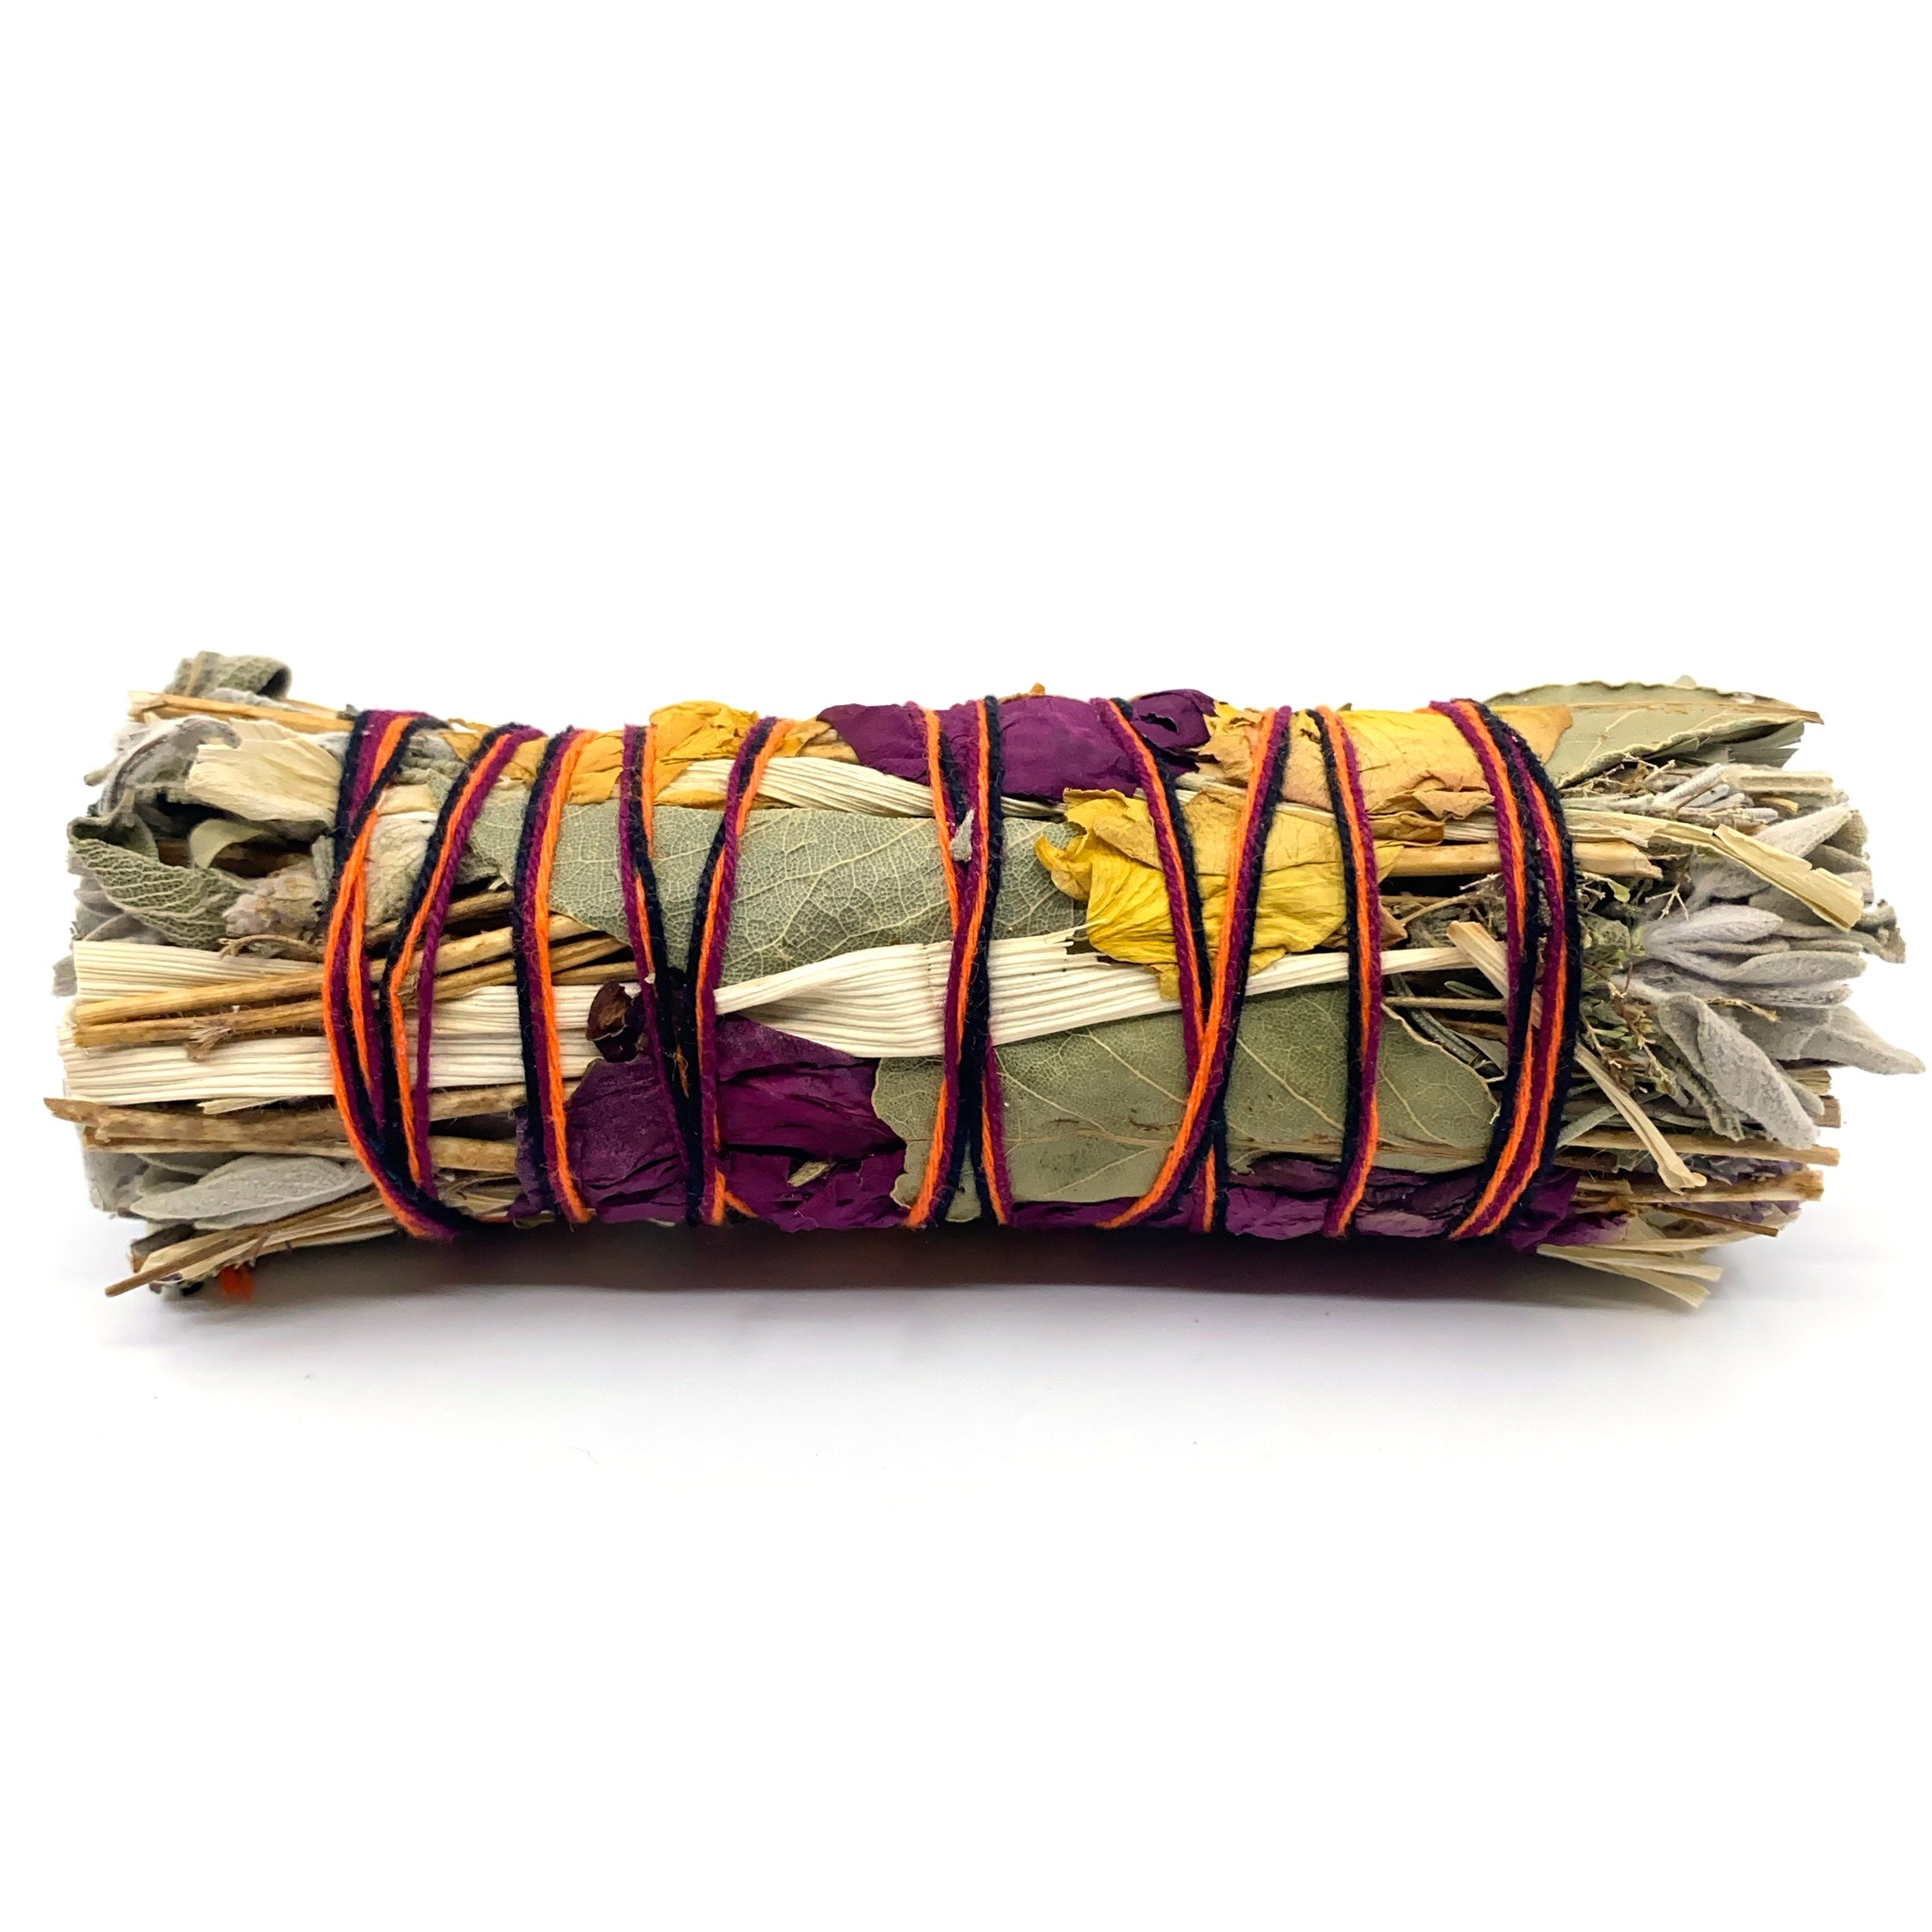 Affirmation for Business Success - With Good Intentions Smudge Stick